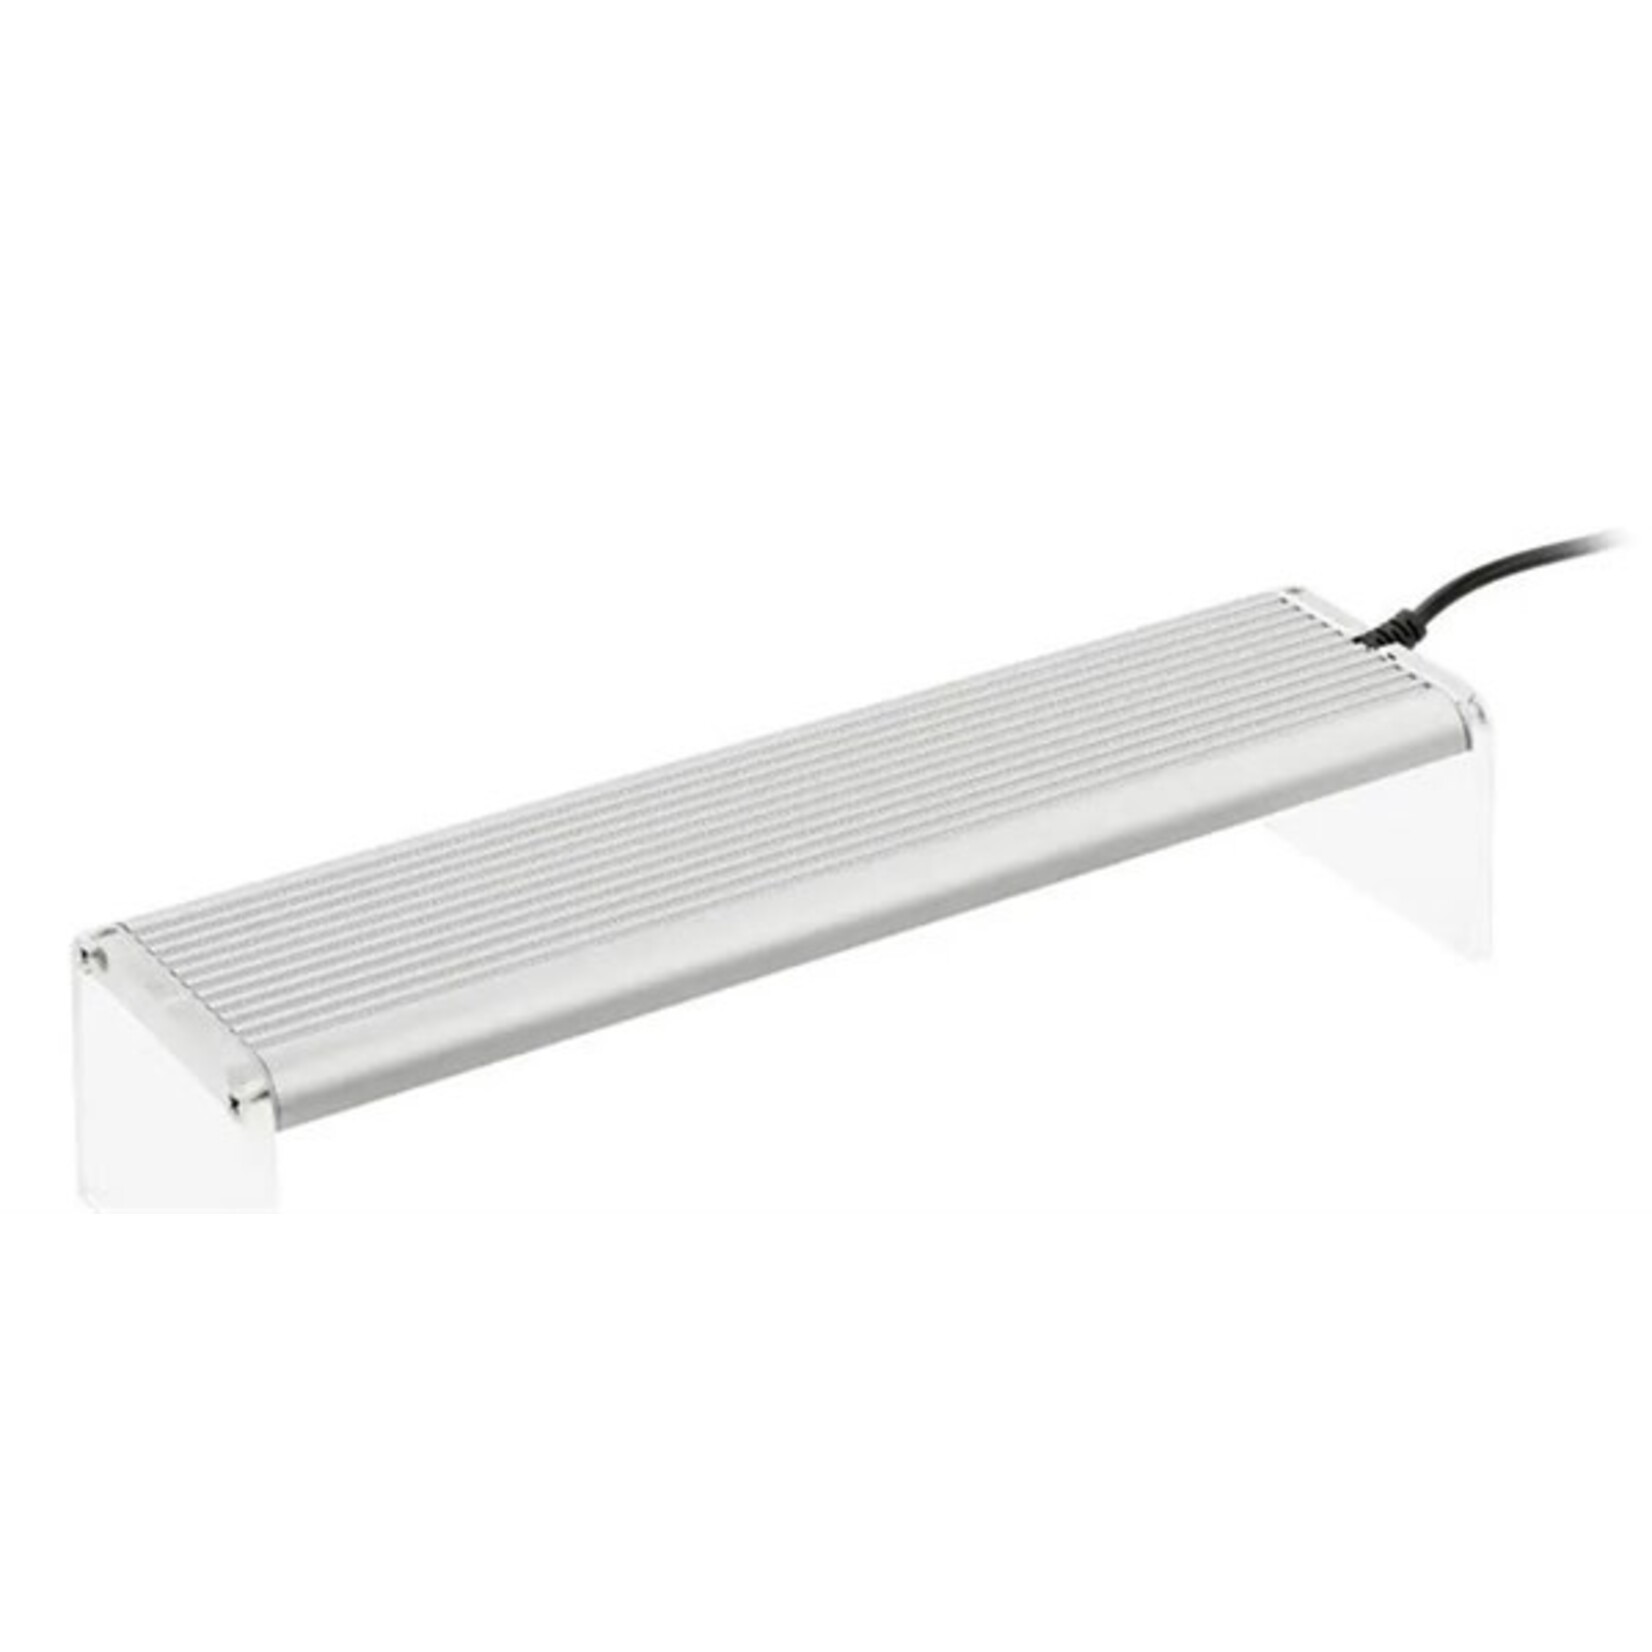 Chihiros A LED A301 30 cm 18w  - incl. Duitse trafo